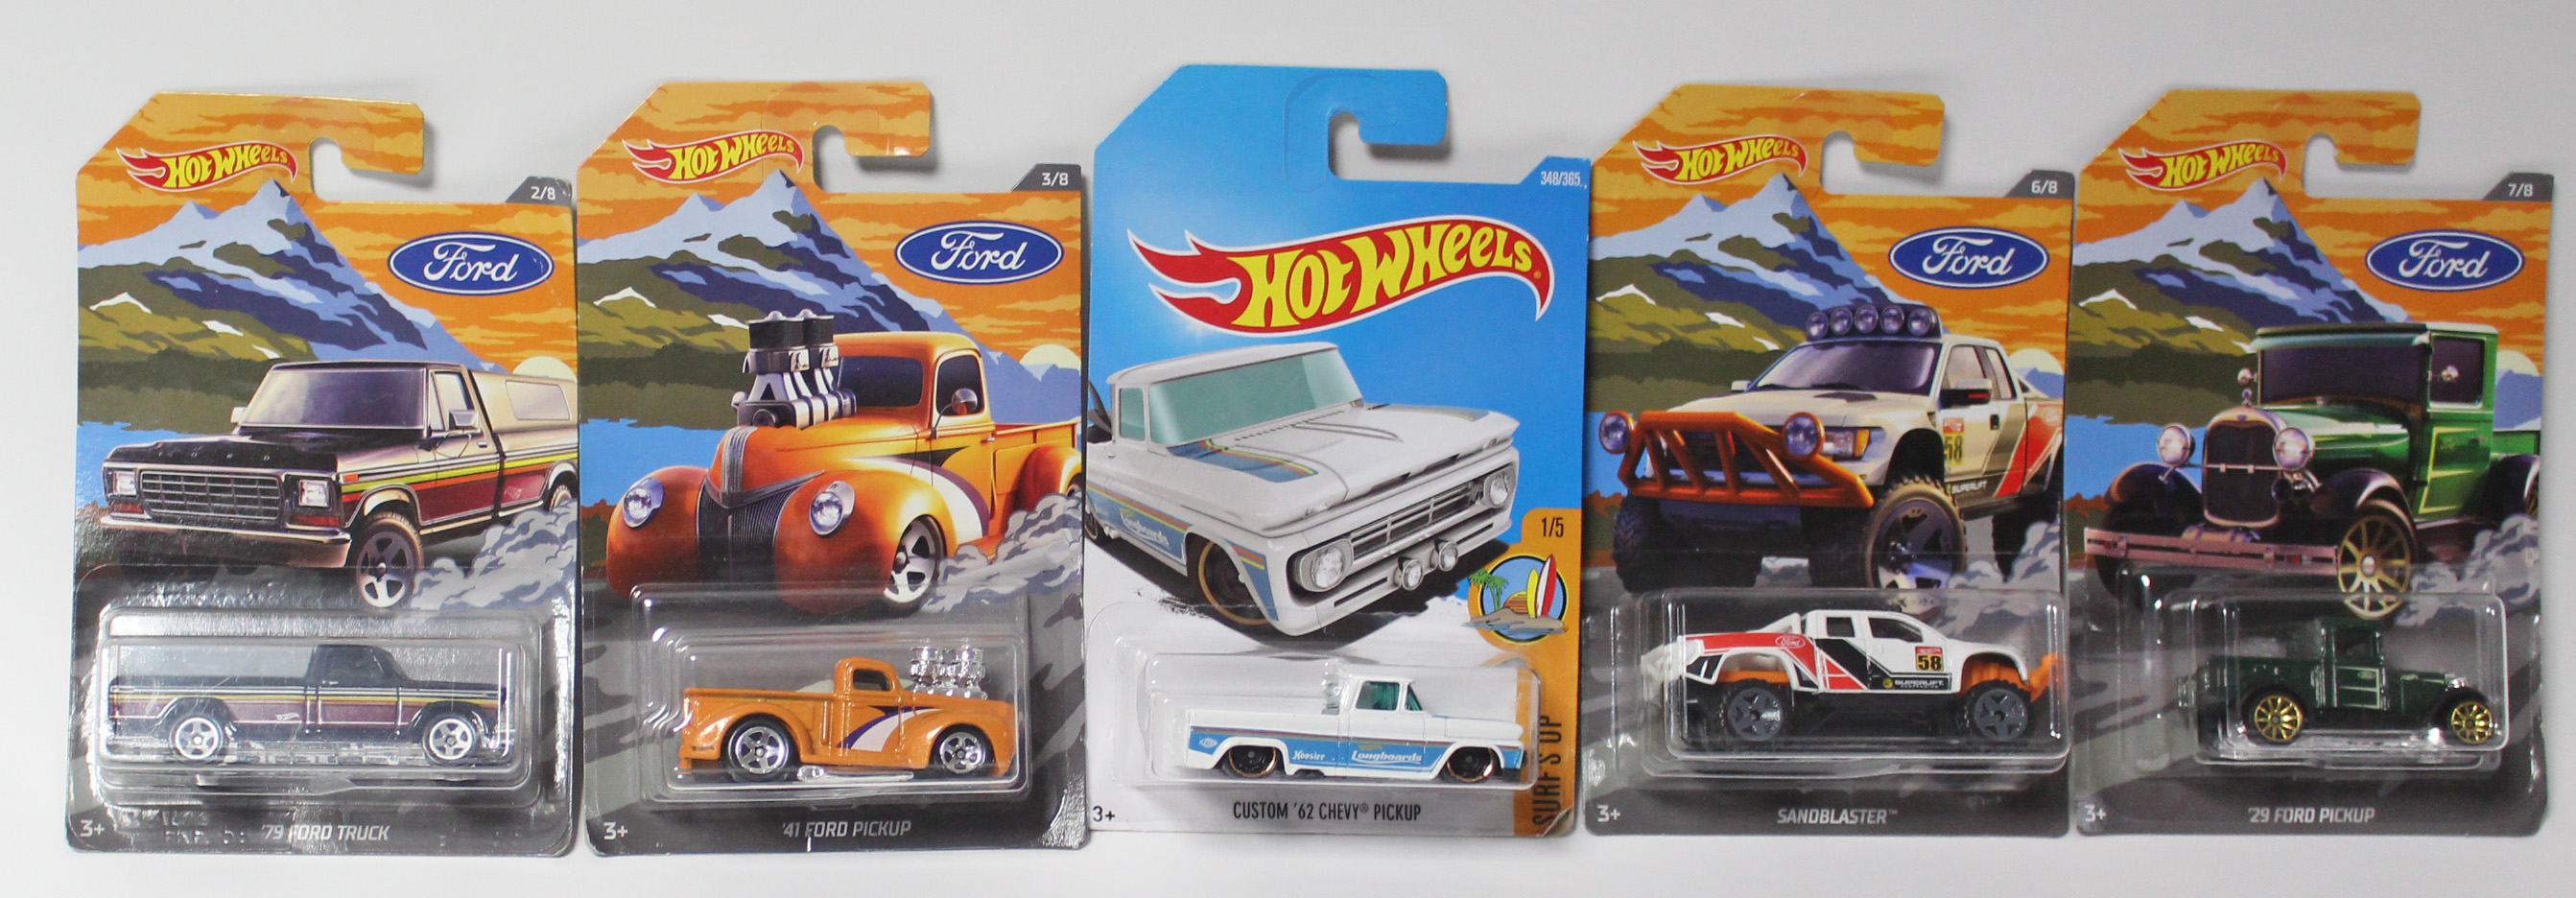 Fourteen Hot Wheels scale models each with original packaging. - Image 2 of 3